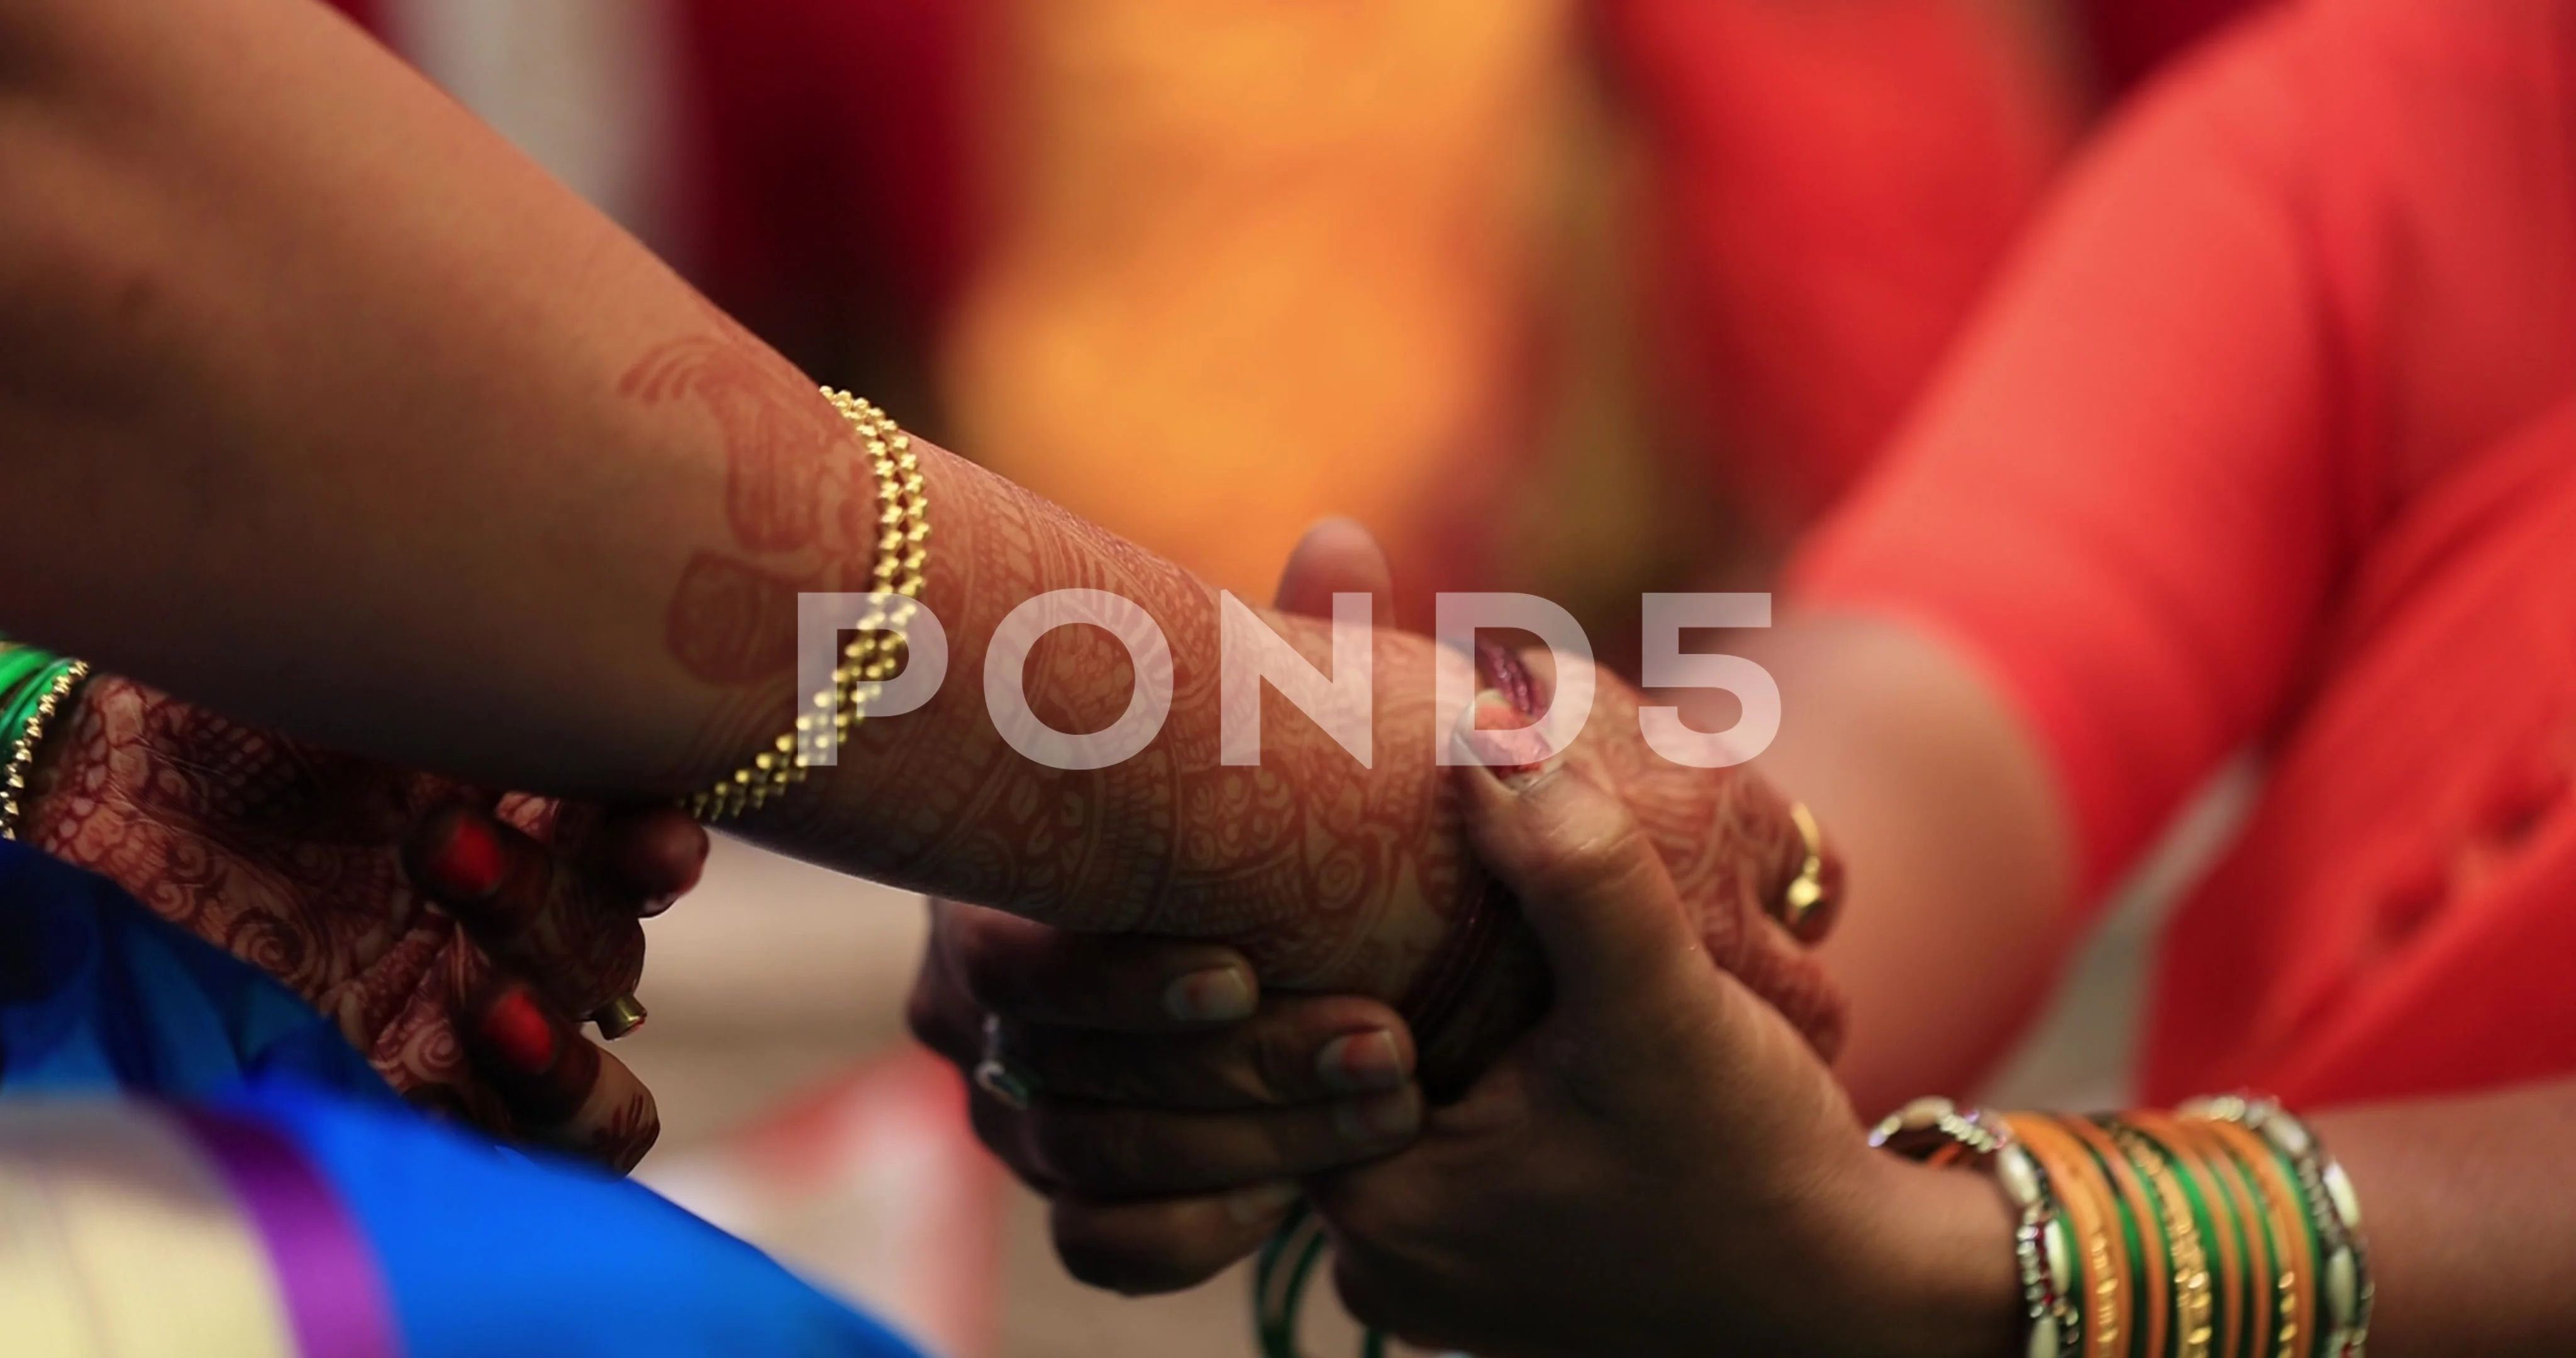 indian bride and groom holding hands hd